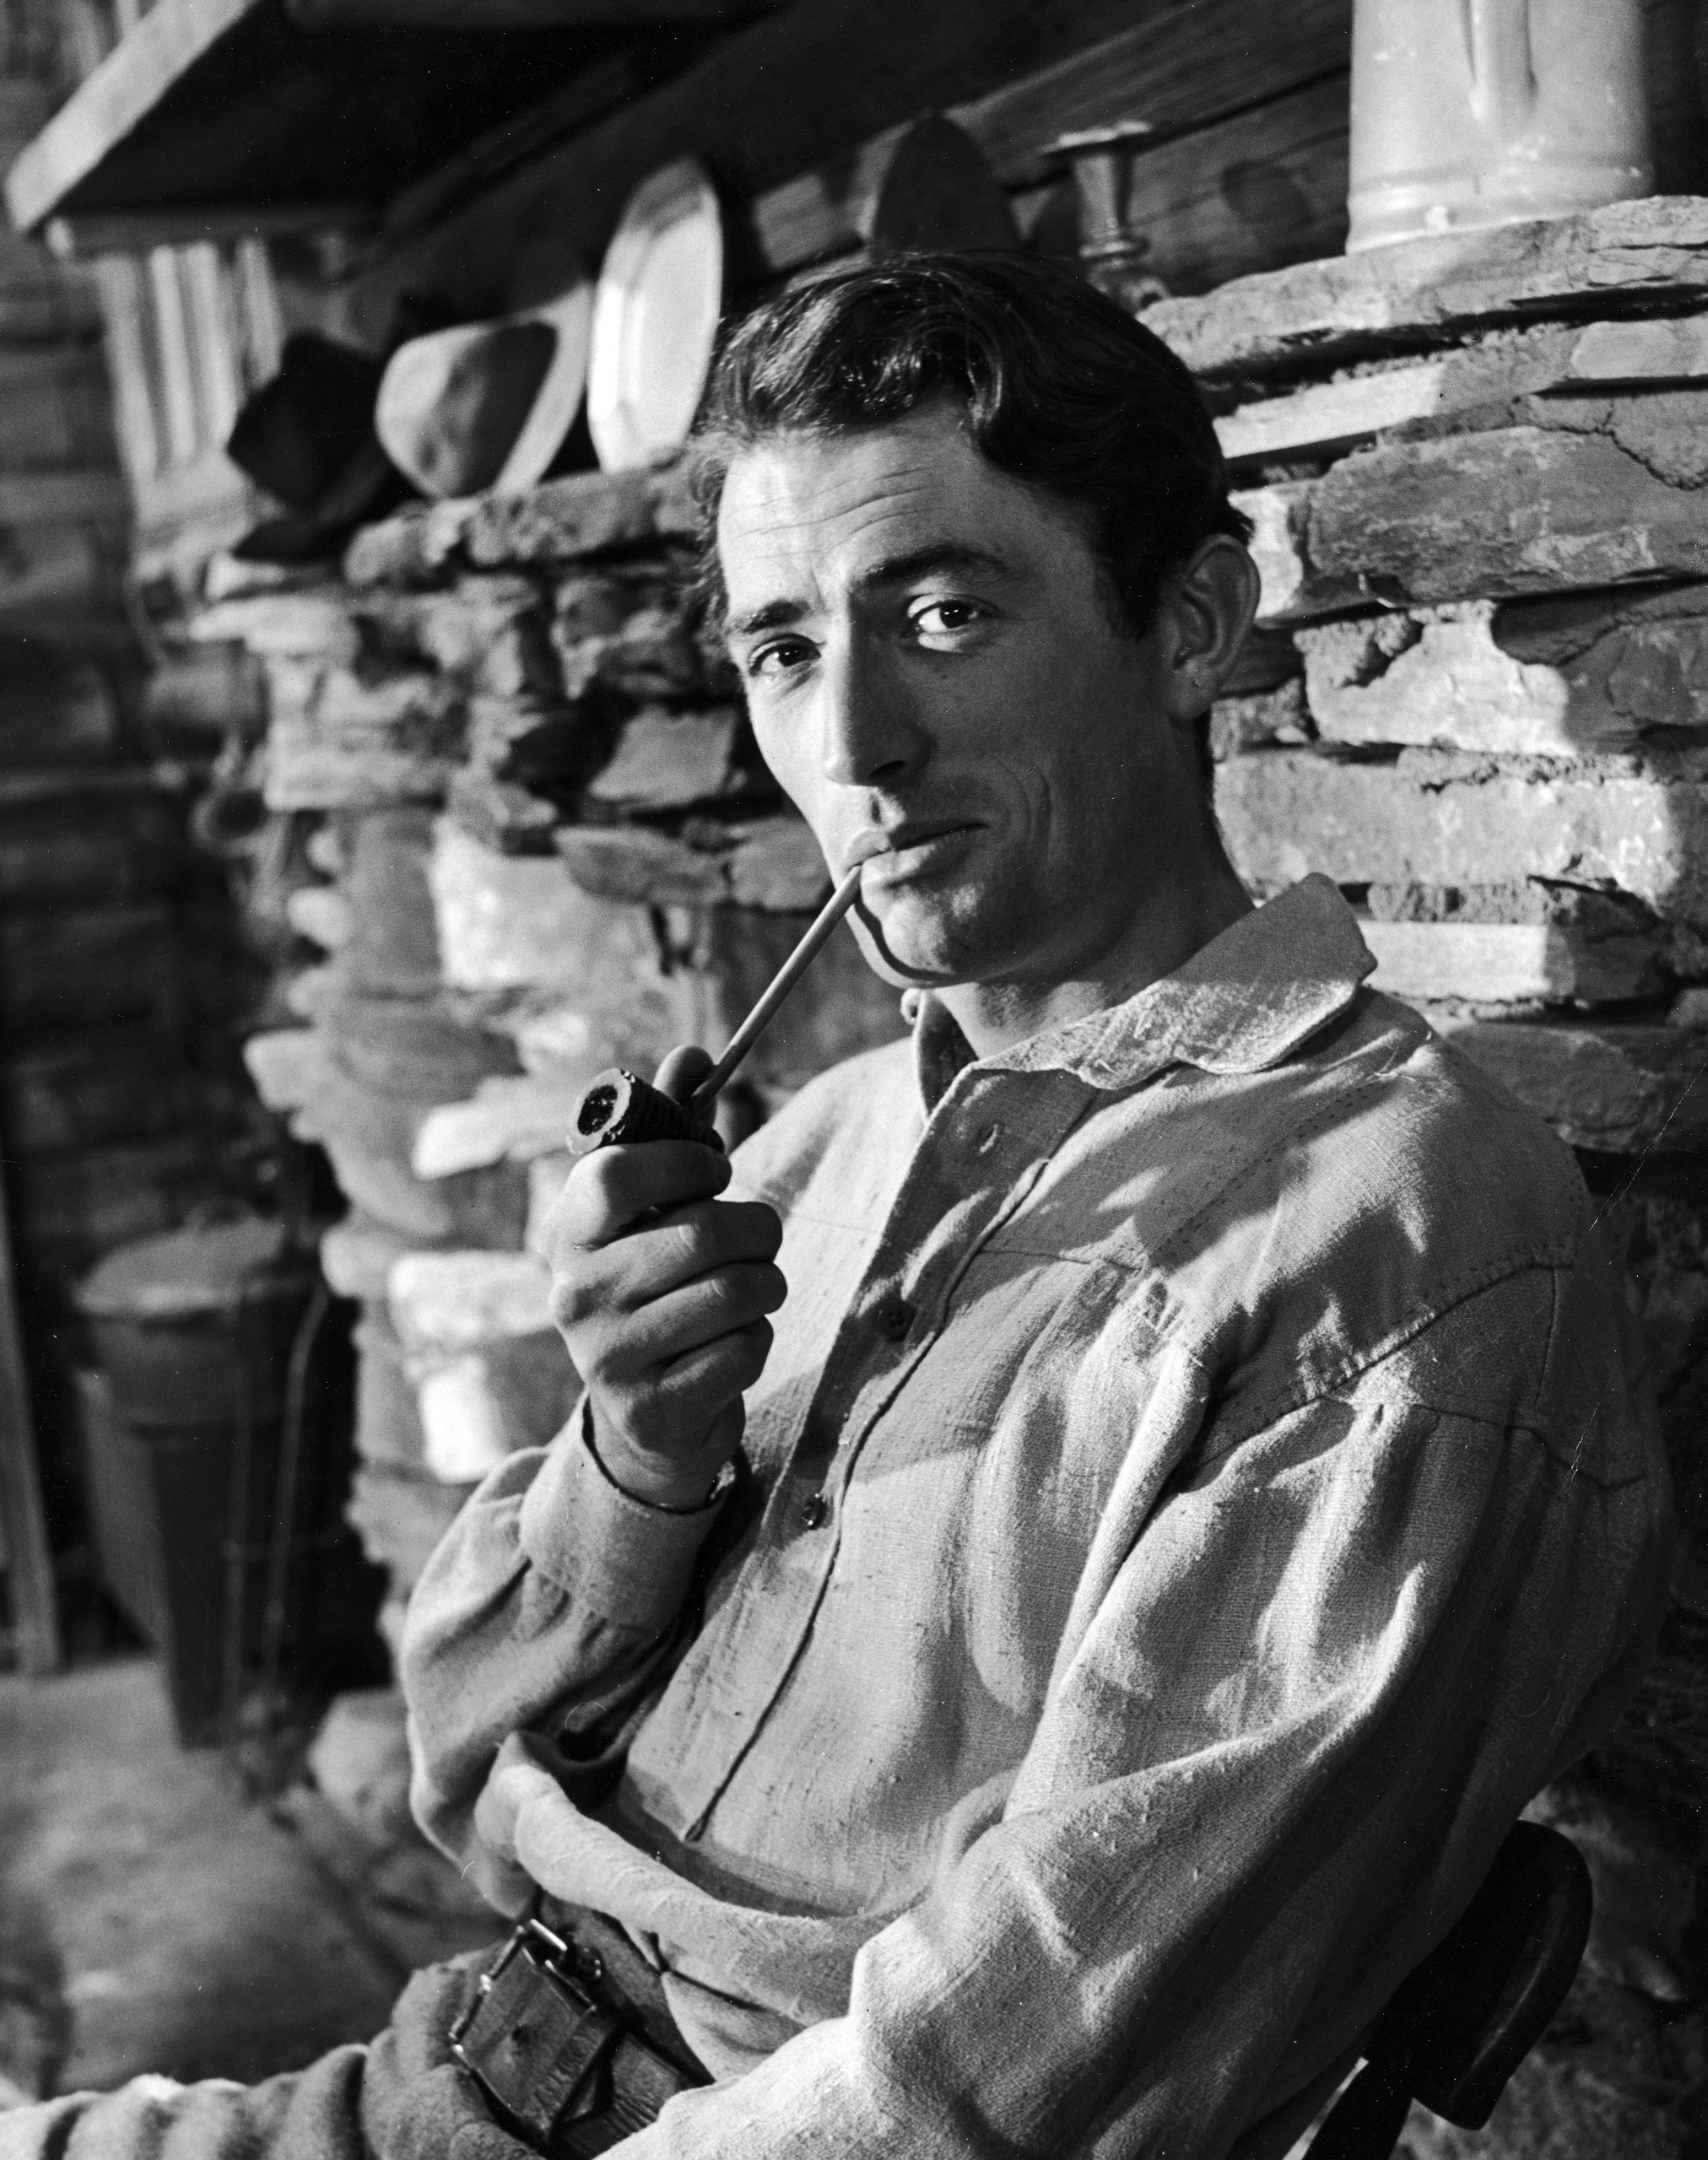 Gregory Peck smoking a pipe for a scene in the movie "The Yearling." 1947.